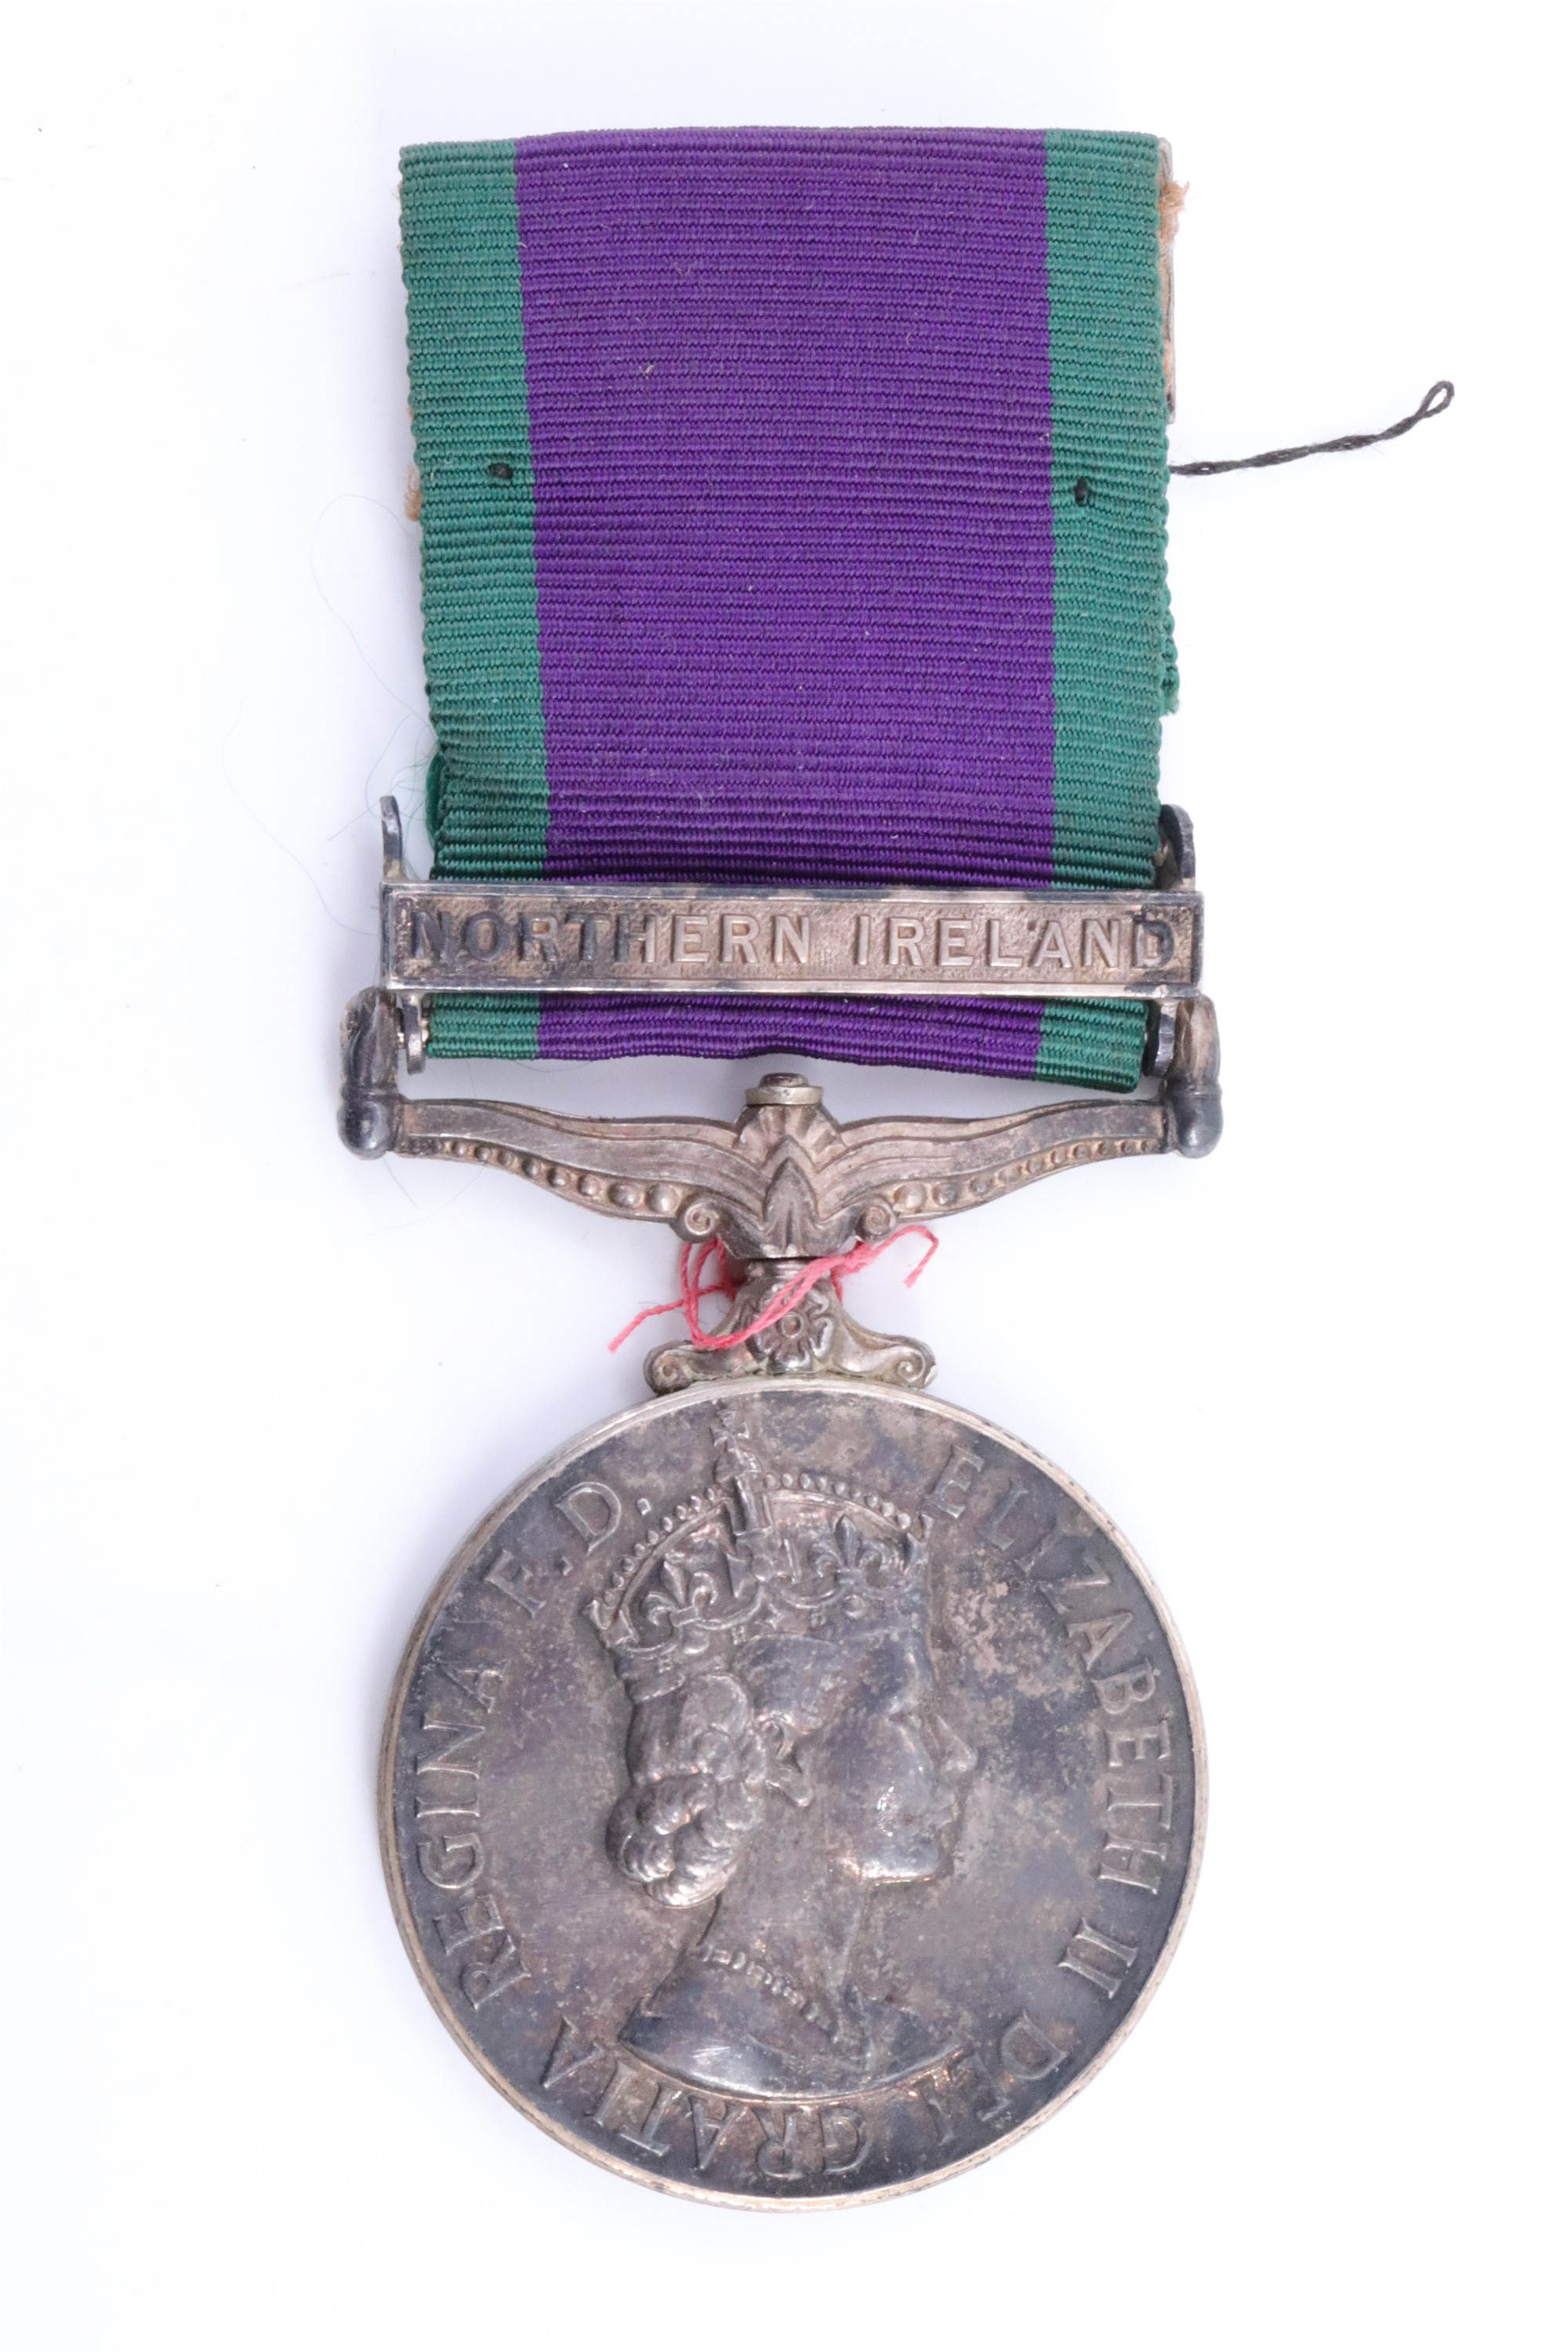 A General Service Medal with Northern Ireland clasp to 24334748 GDSM R H Philpot. Grenadier Guards